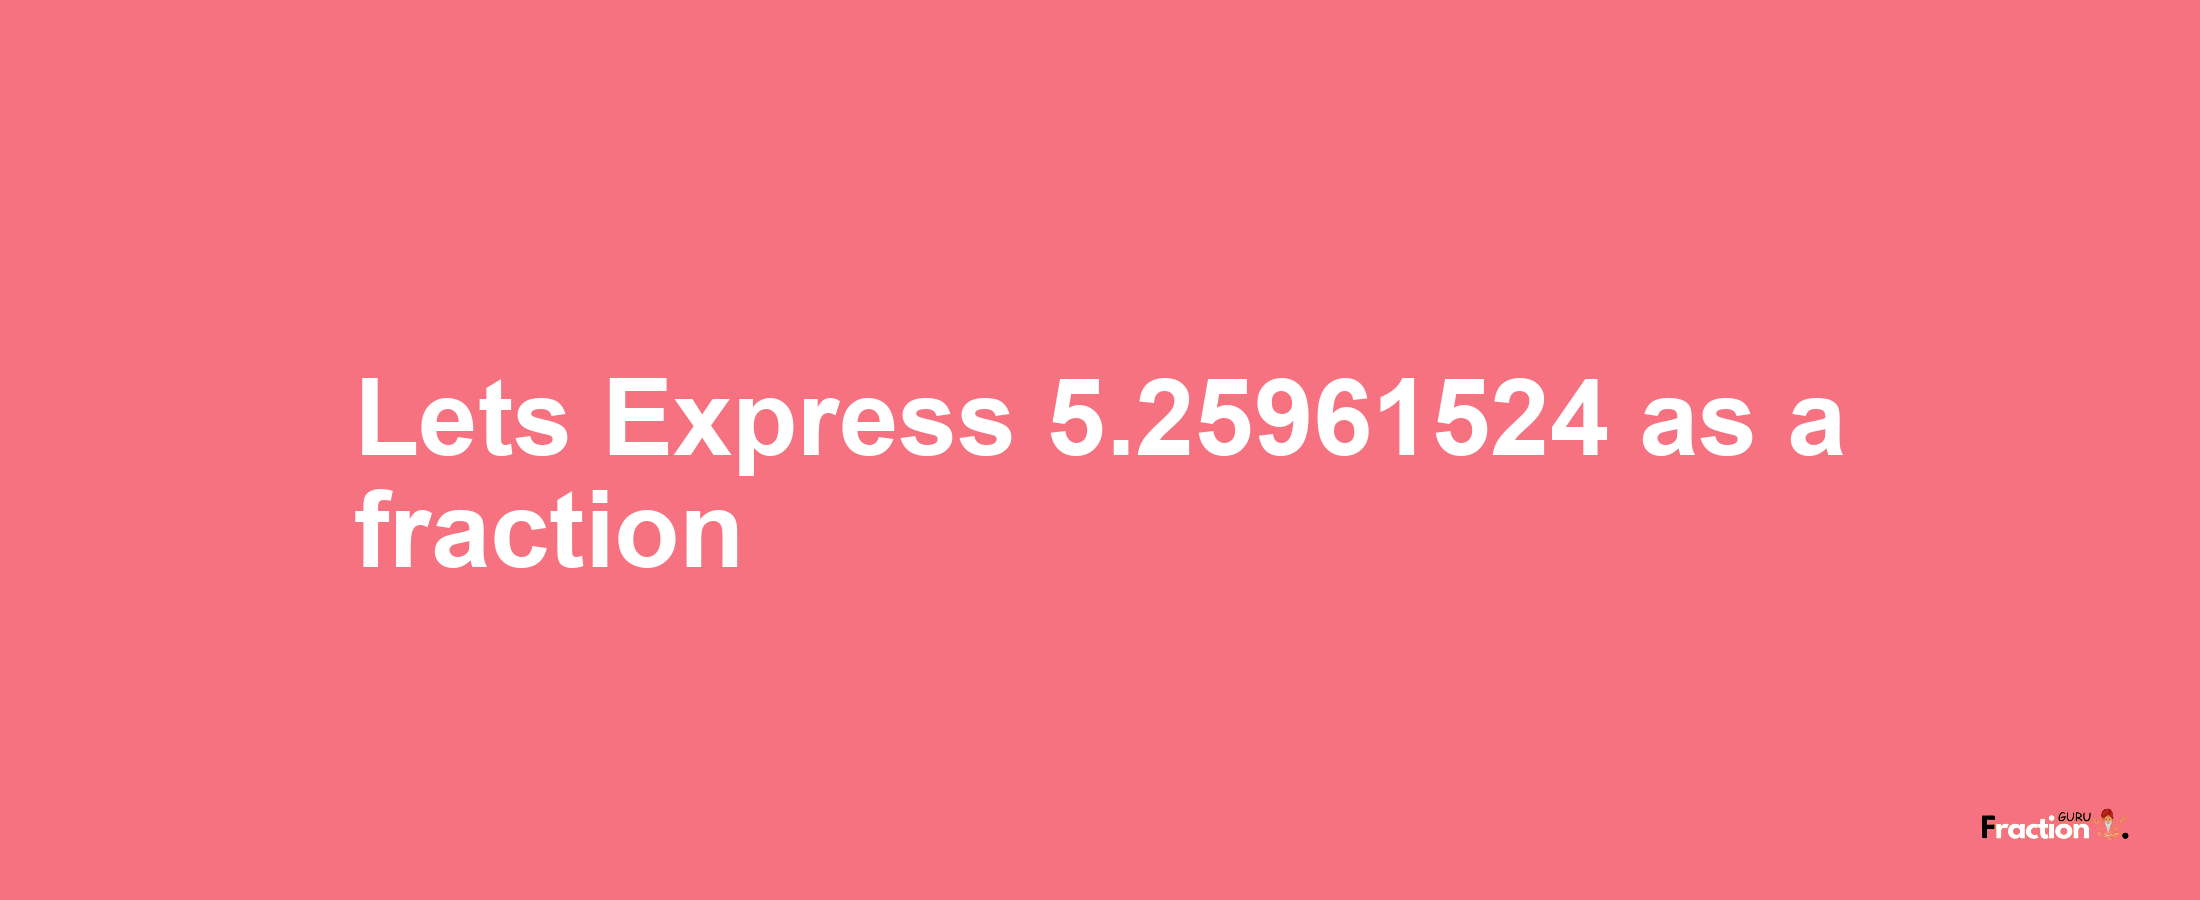 Lets Express 5.25961524 as afraction